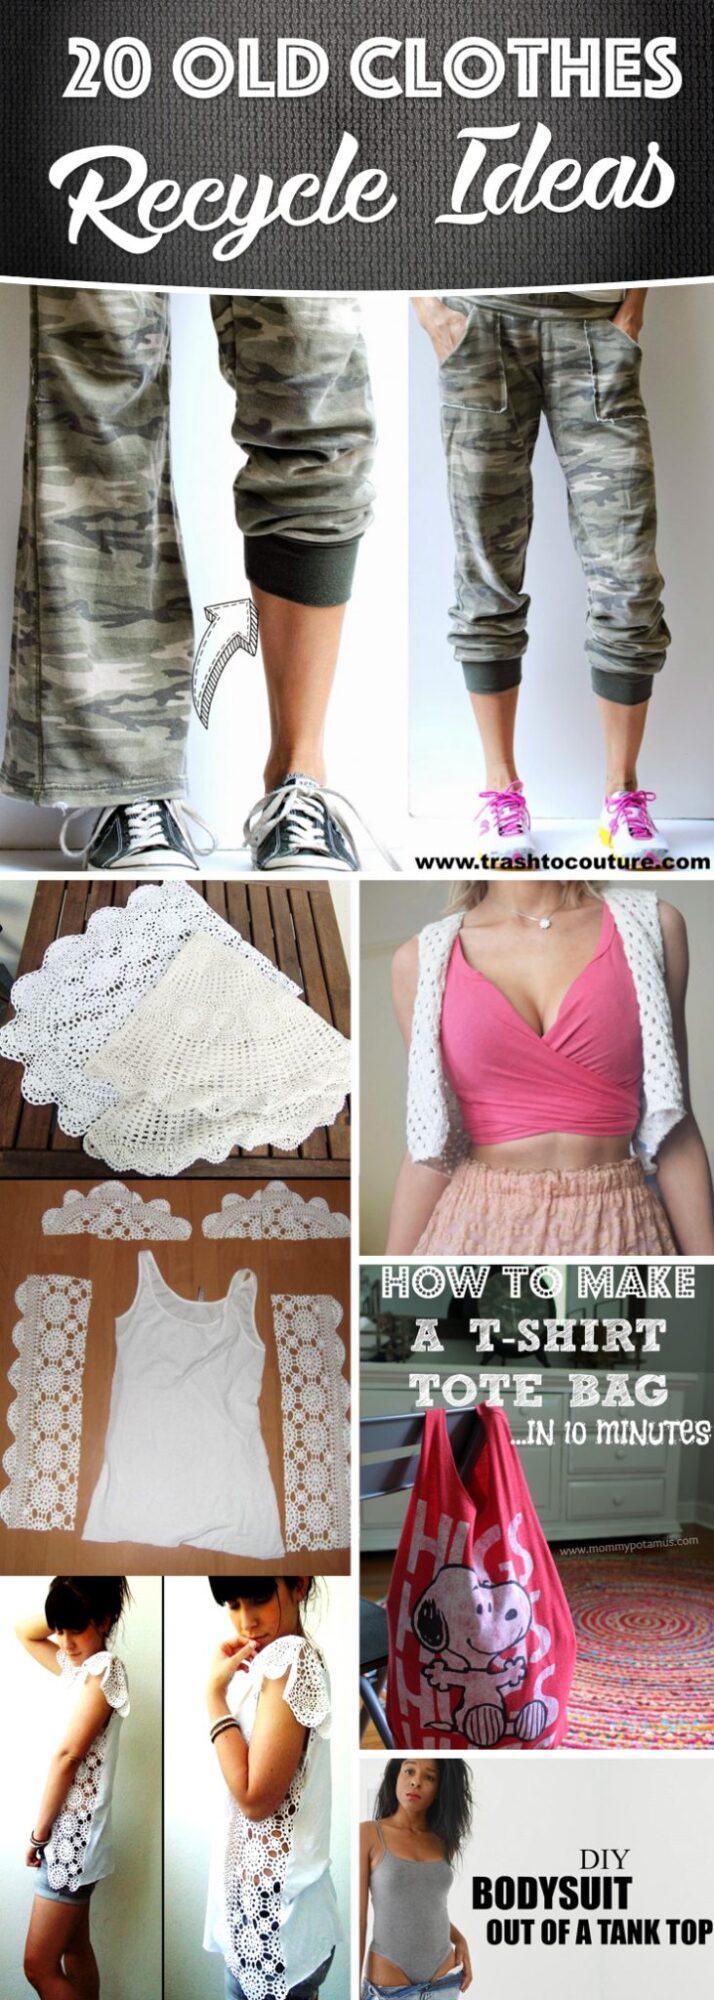 Guide to recycling old clothes around the house